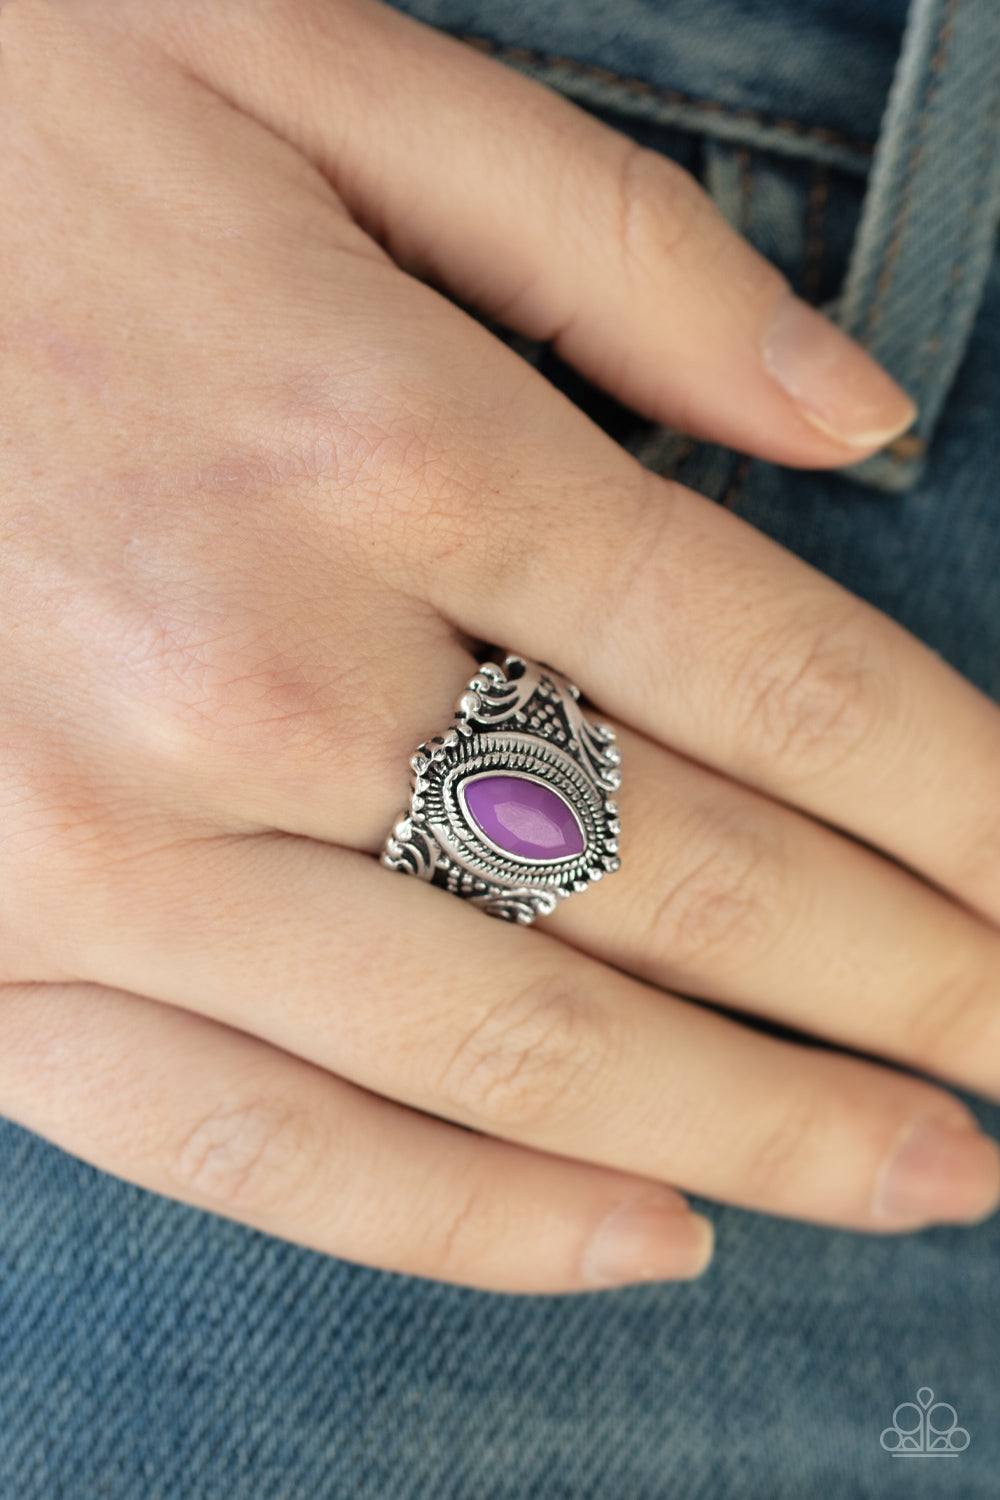 Tangy Texture Ring - Purple